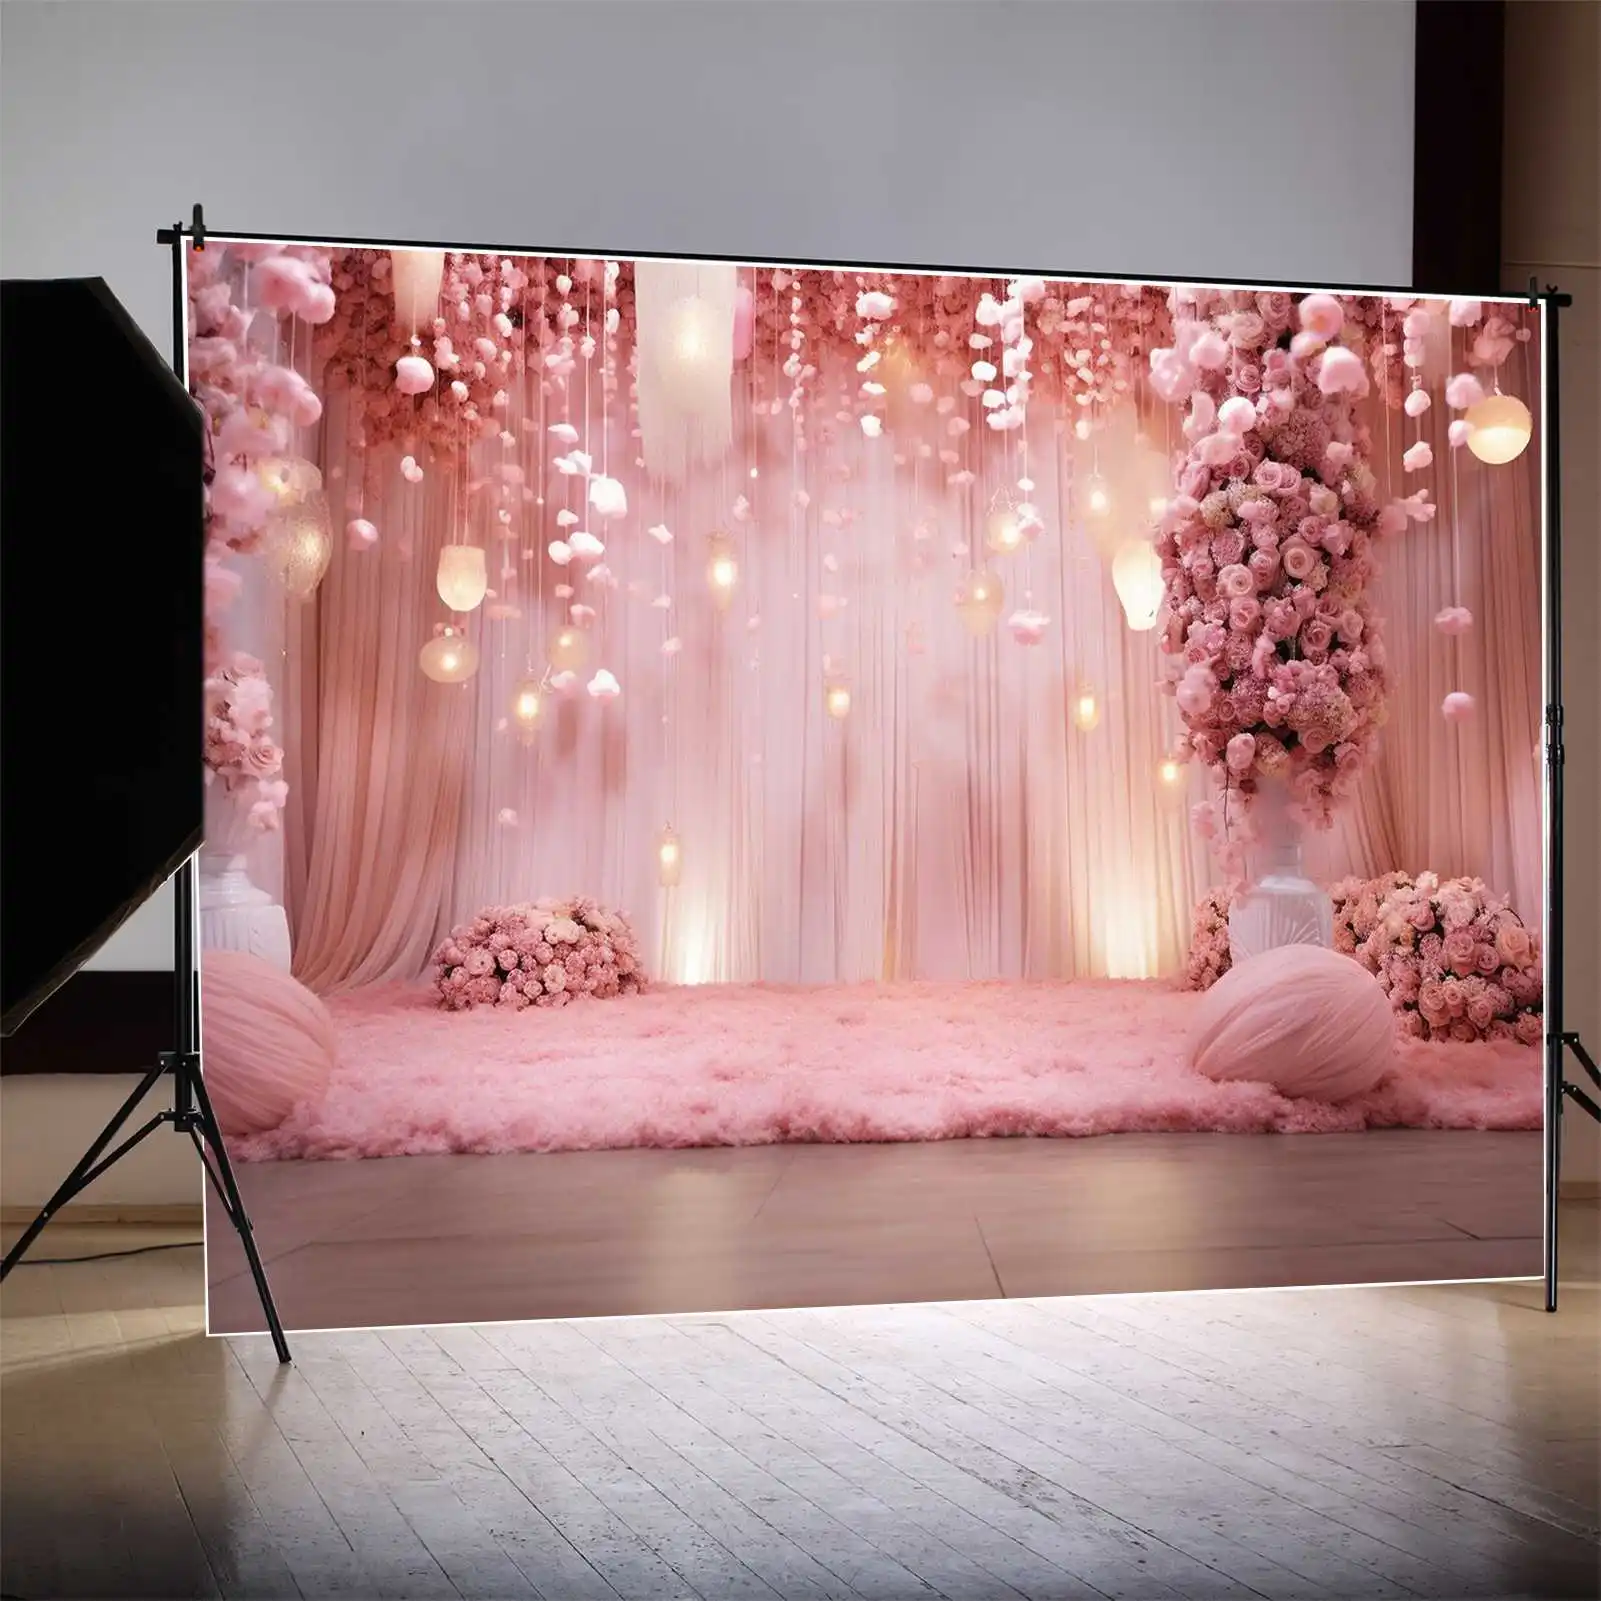 

MOON.QG Backdrop Wedding Draping Fabric Background for Photoshoot Pink Floral Flower Candle Light Up Curtain Carpet Decorations